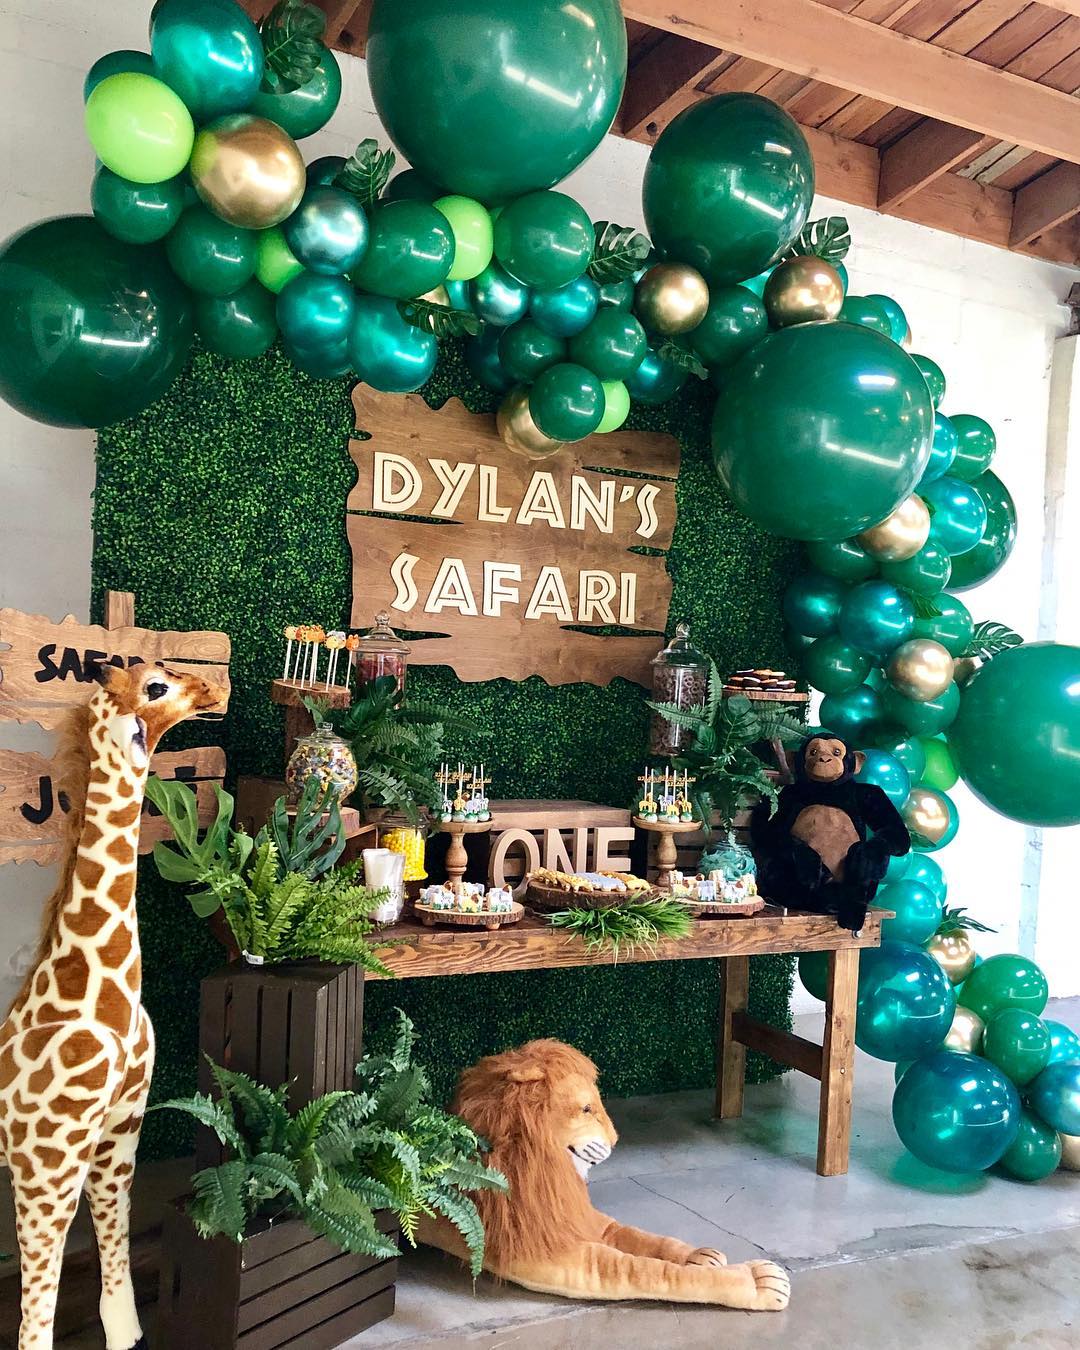 Safari themed birthday party for boy's 1st birthday. Decorated with turf grass wall, large stuffed animals, and green and gold balloons.